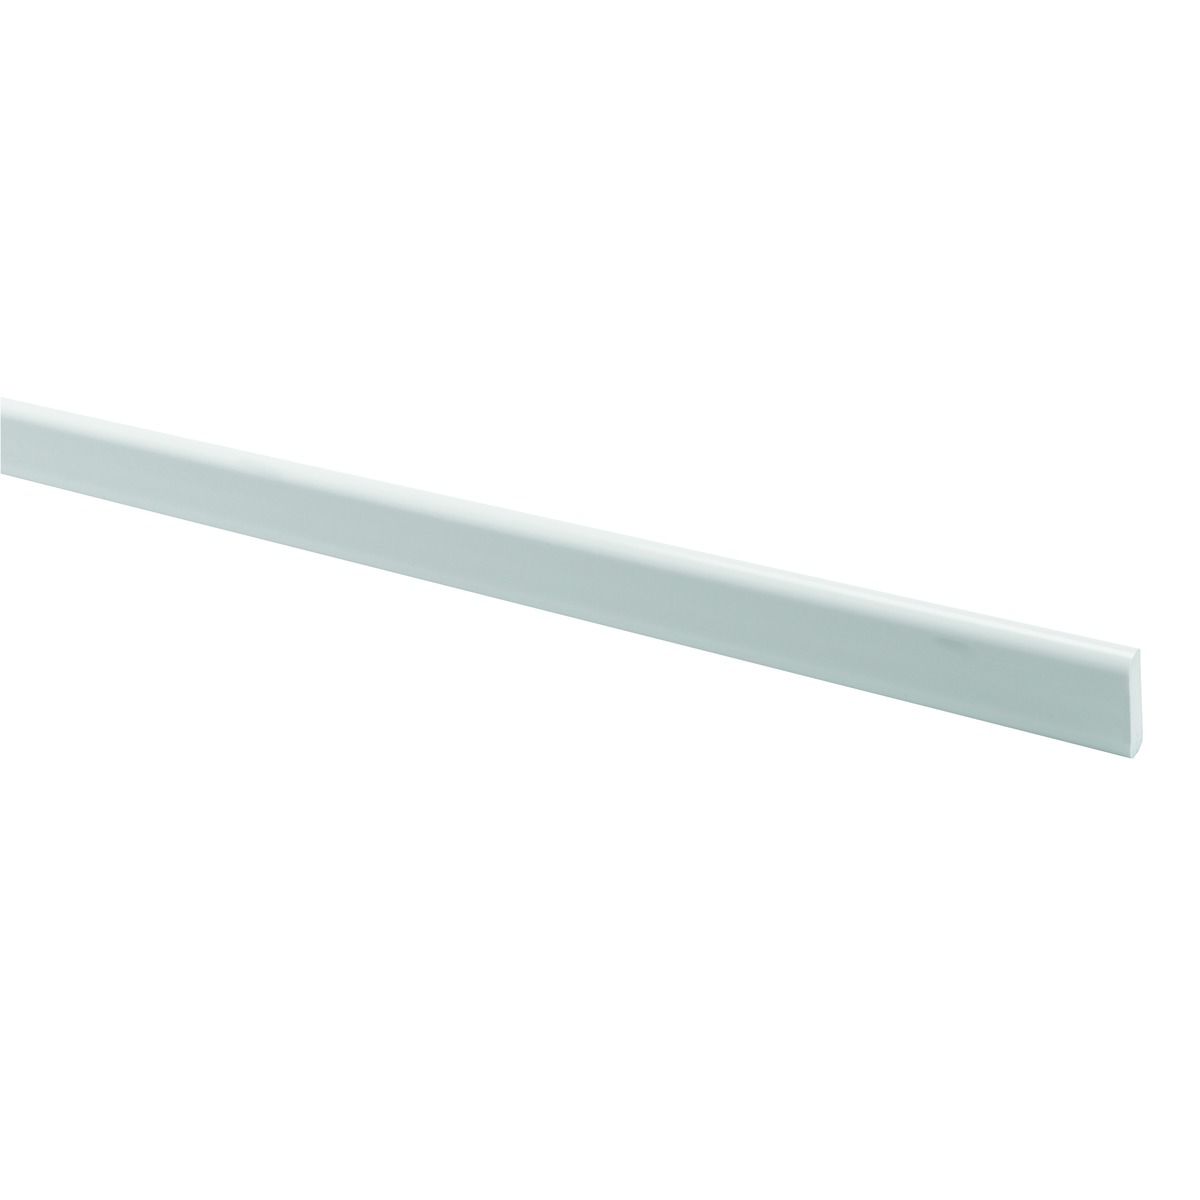 Image of Wickes PVCu White Window Cloaking Trim - 45 x 2500mm - Pack of 5